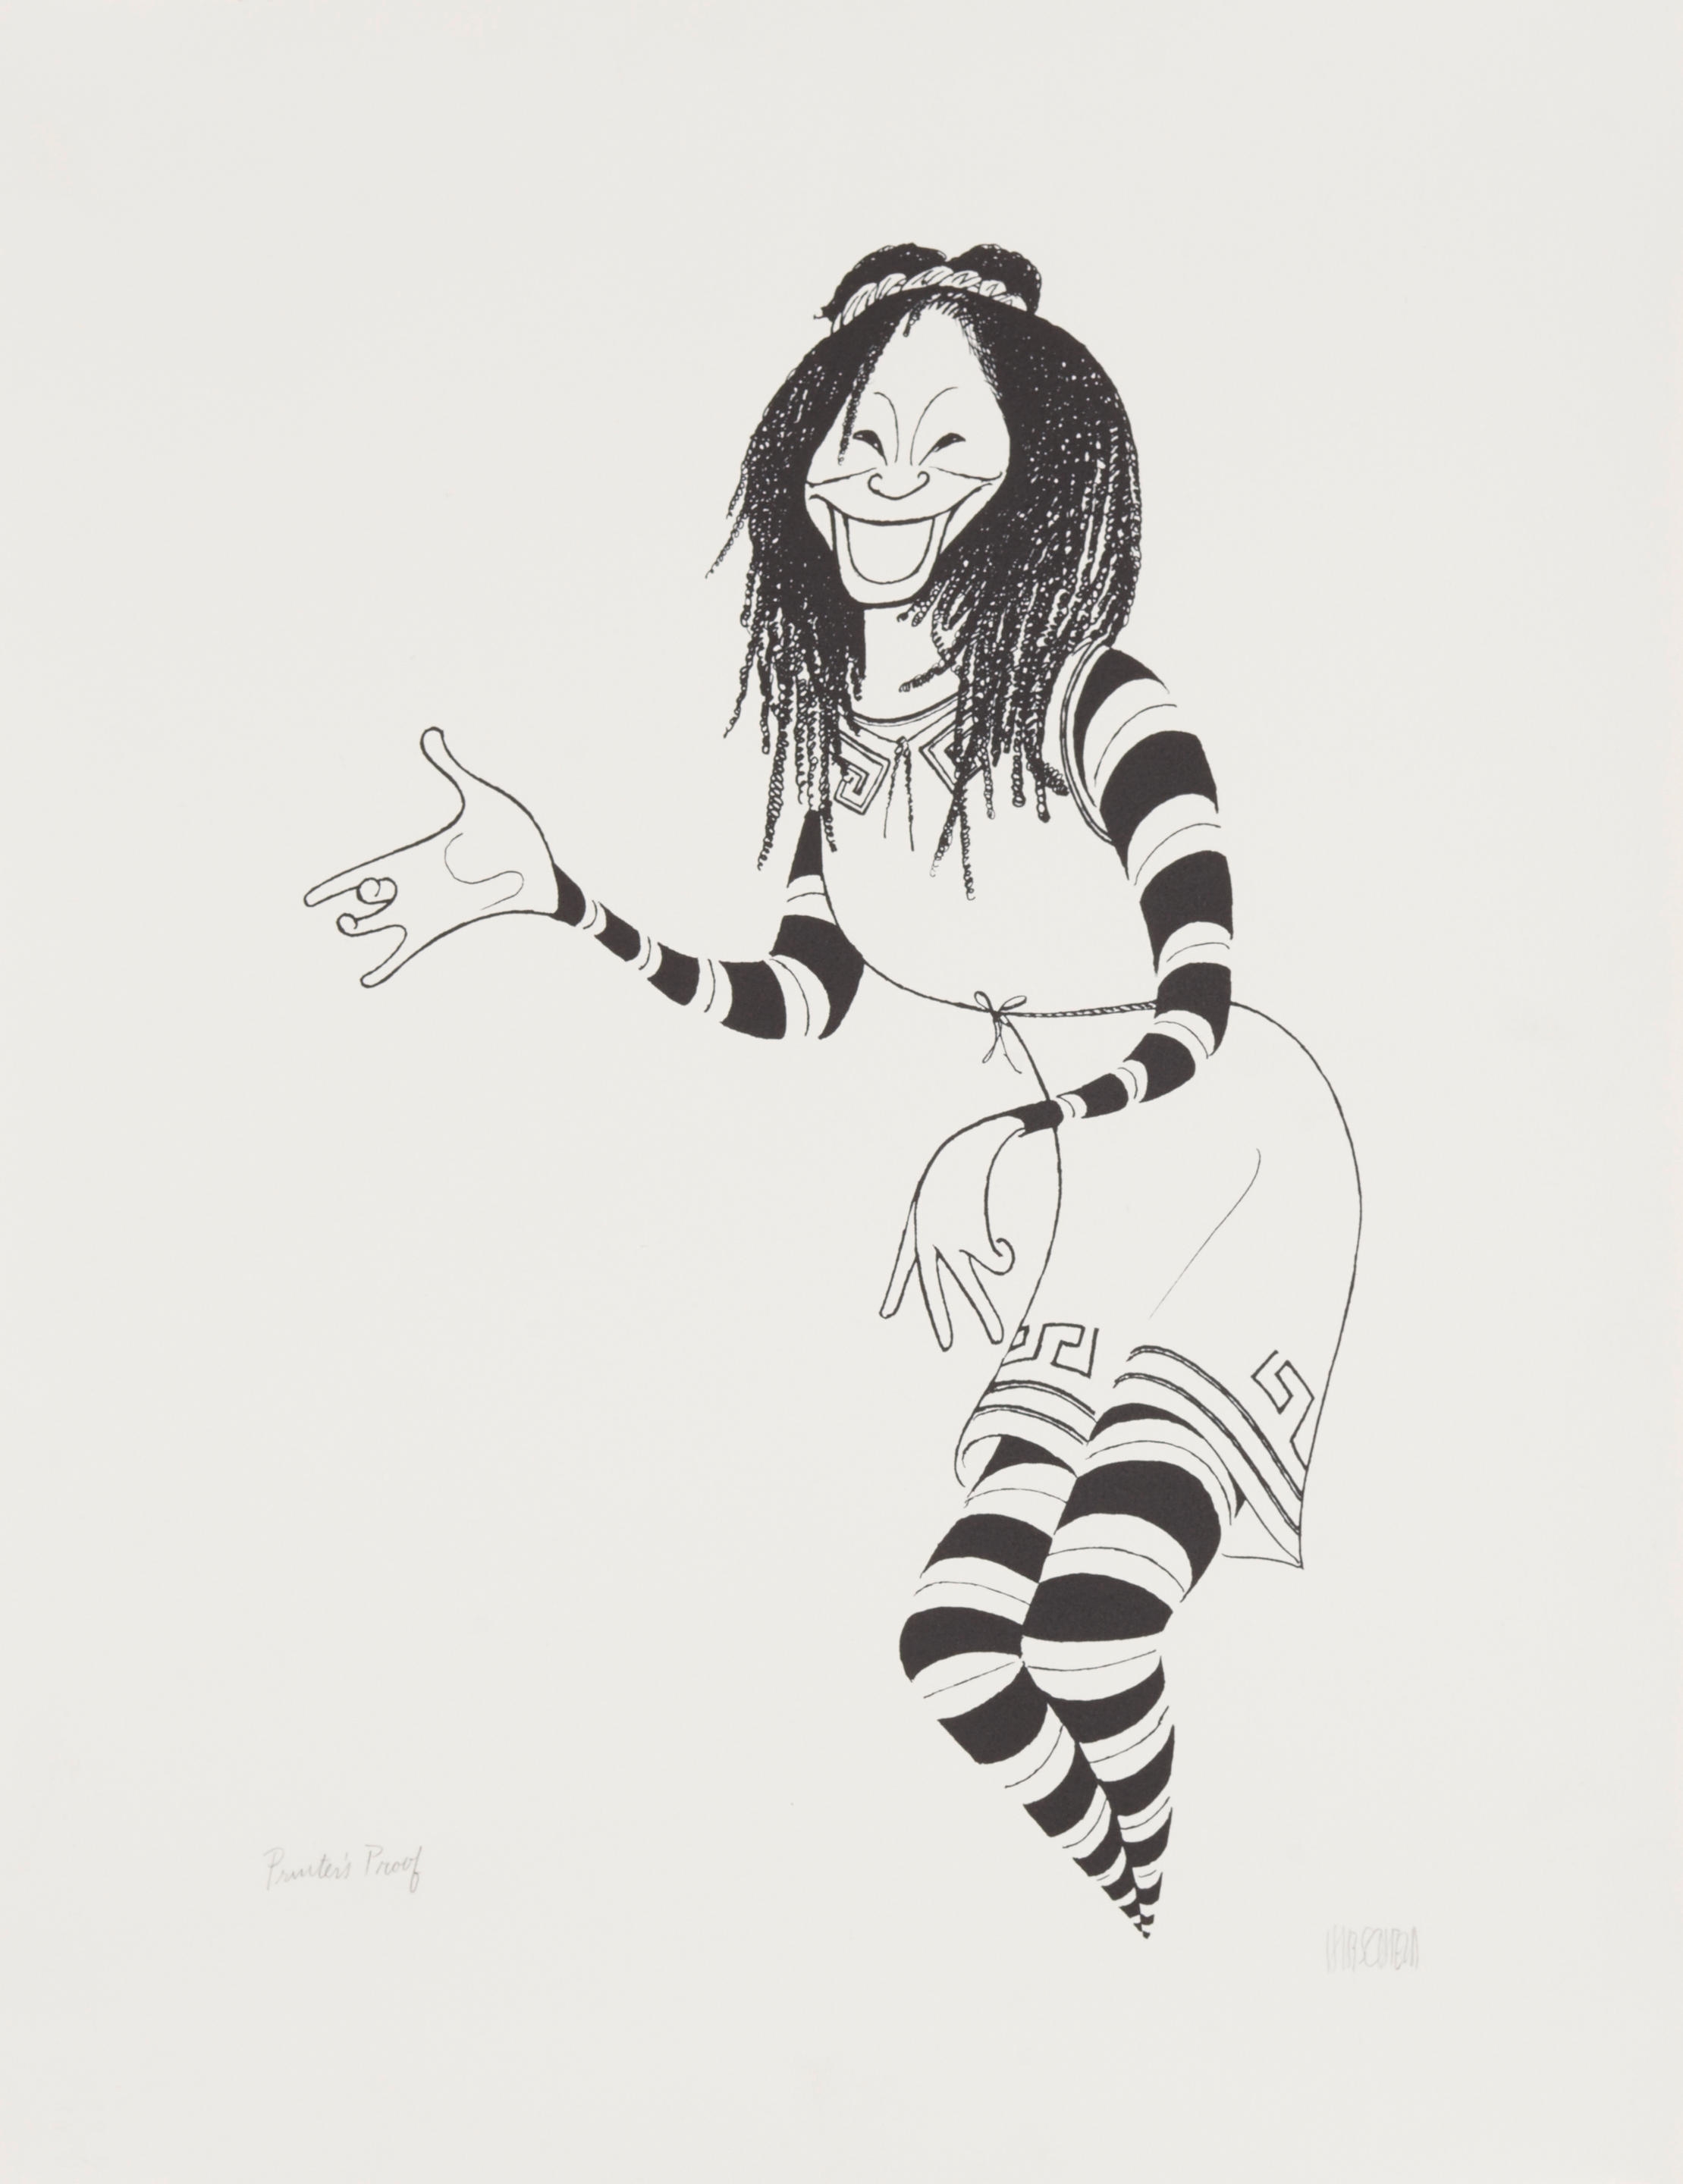 Artwork by Al Hirschfeld, AL HIRSCHFELD (1903-2003) BROADWAY & THEATER COLLECTION, Made of lithographs